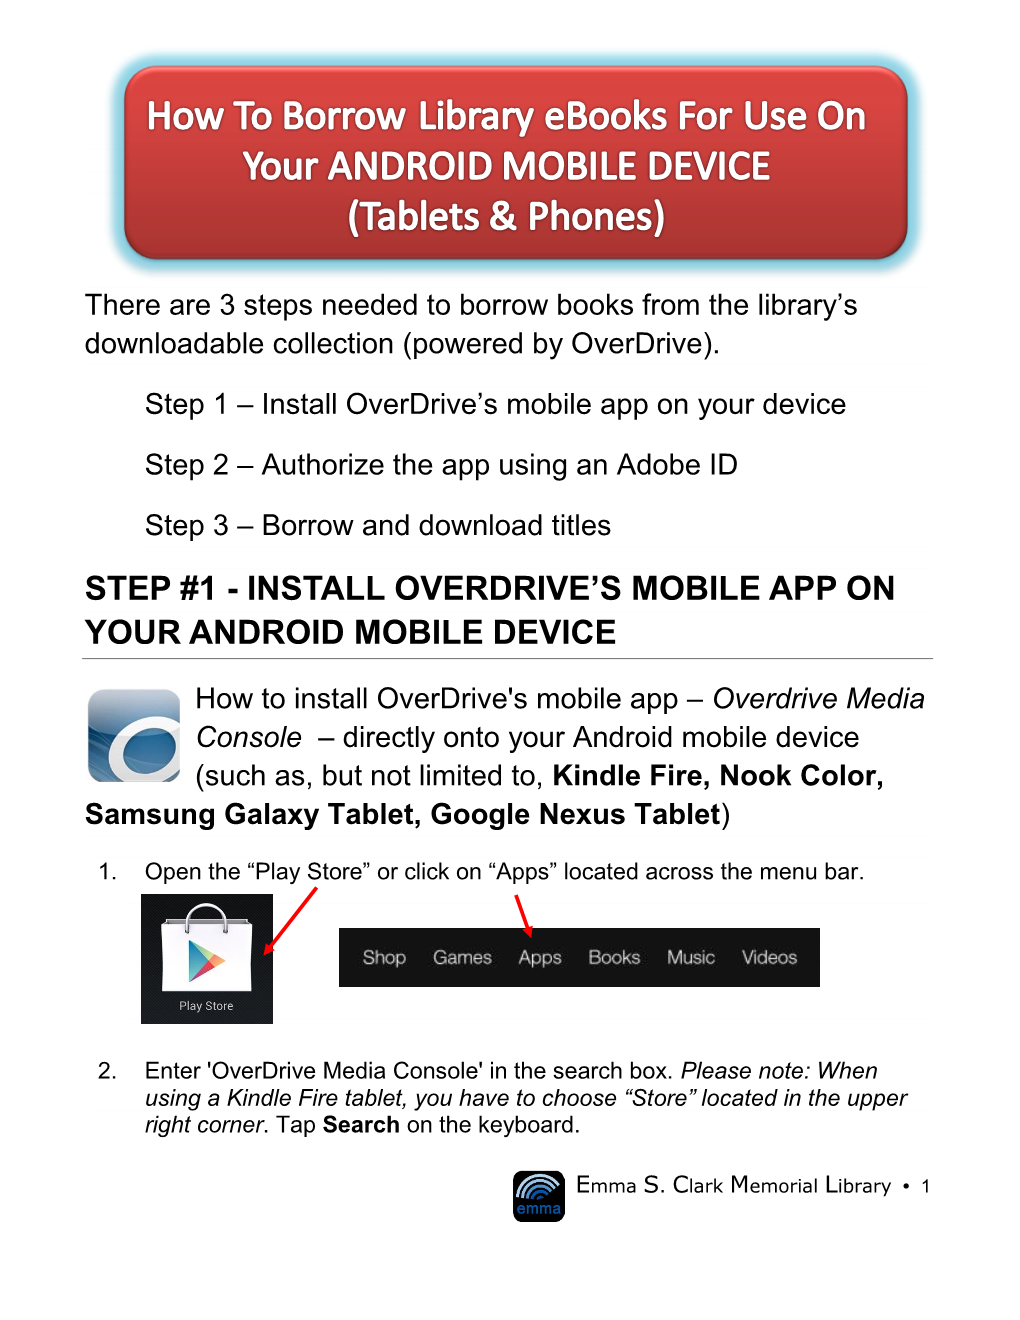 Step #1 - Install Overdrive’S Mobile App on Your Android Mobile Device